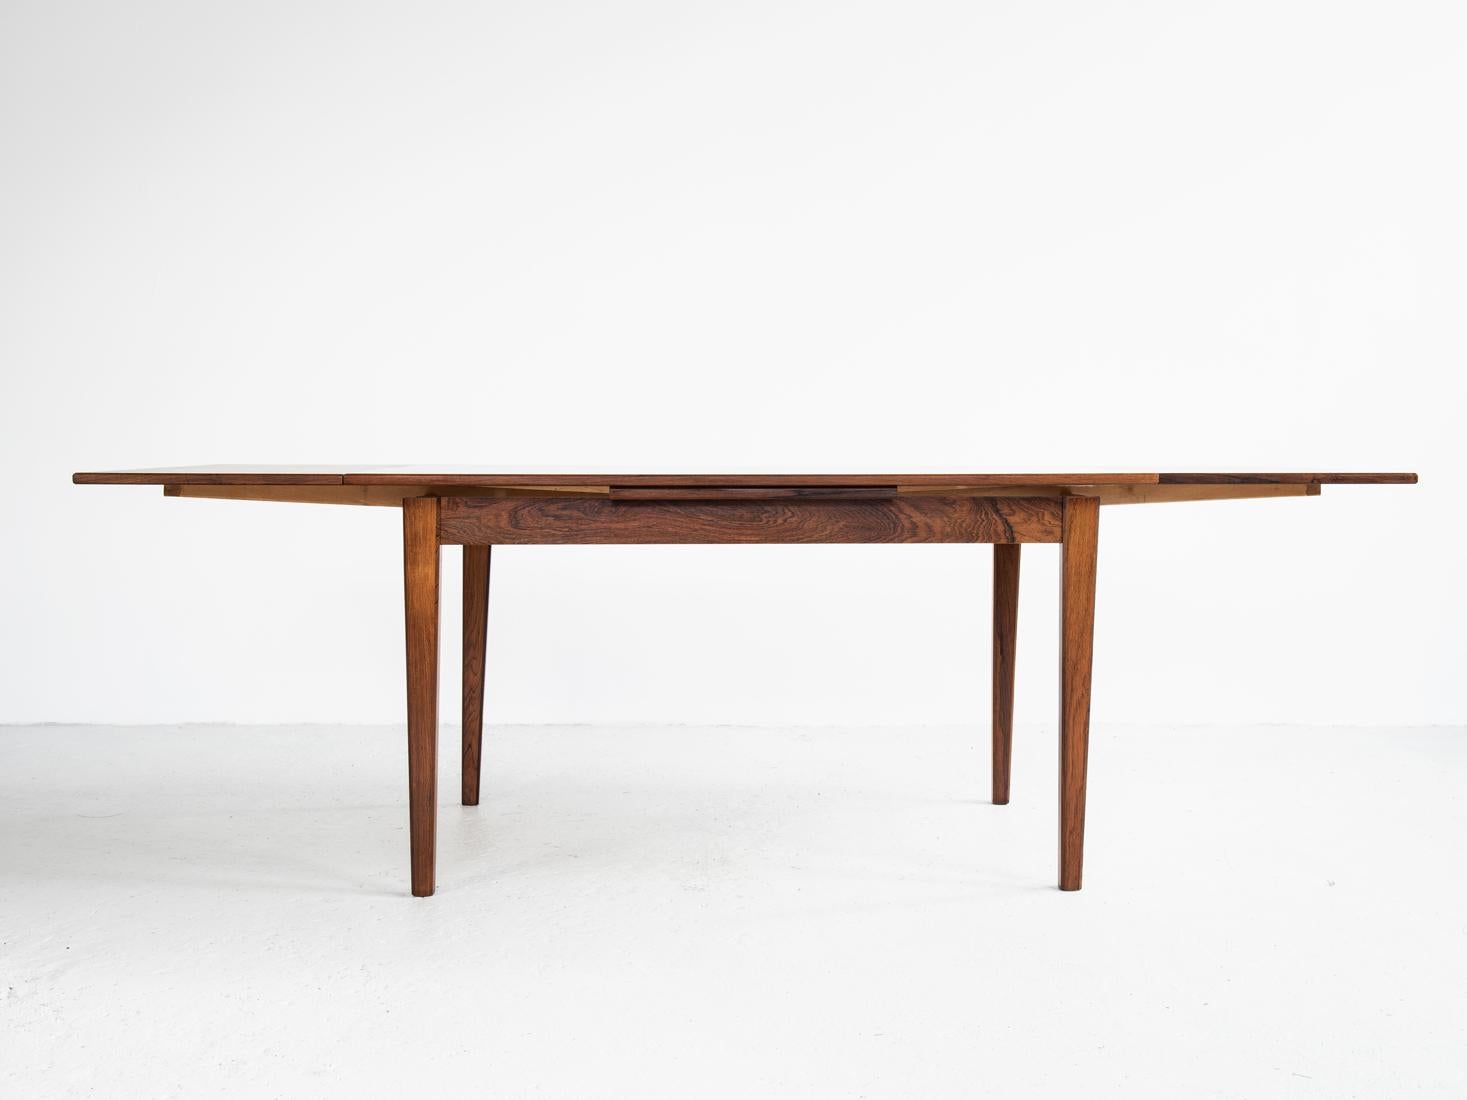 Veneer Midcentury Danish Dining Table in Rosewood with 2 Extensions, 1960s For Sale